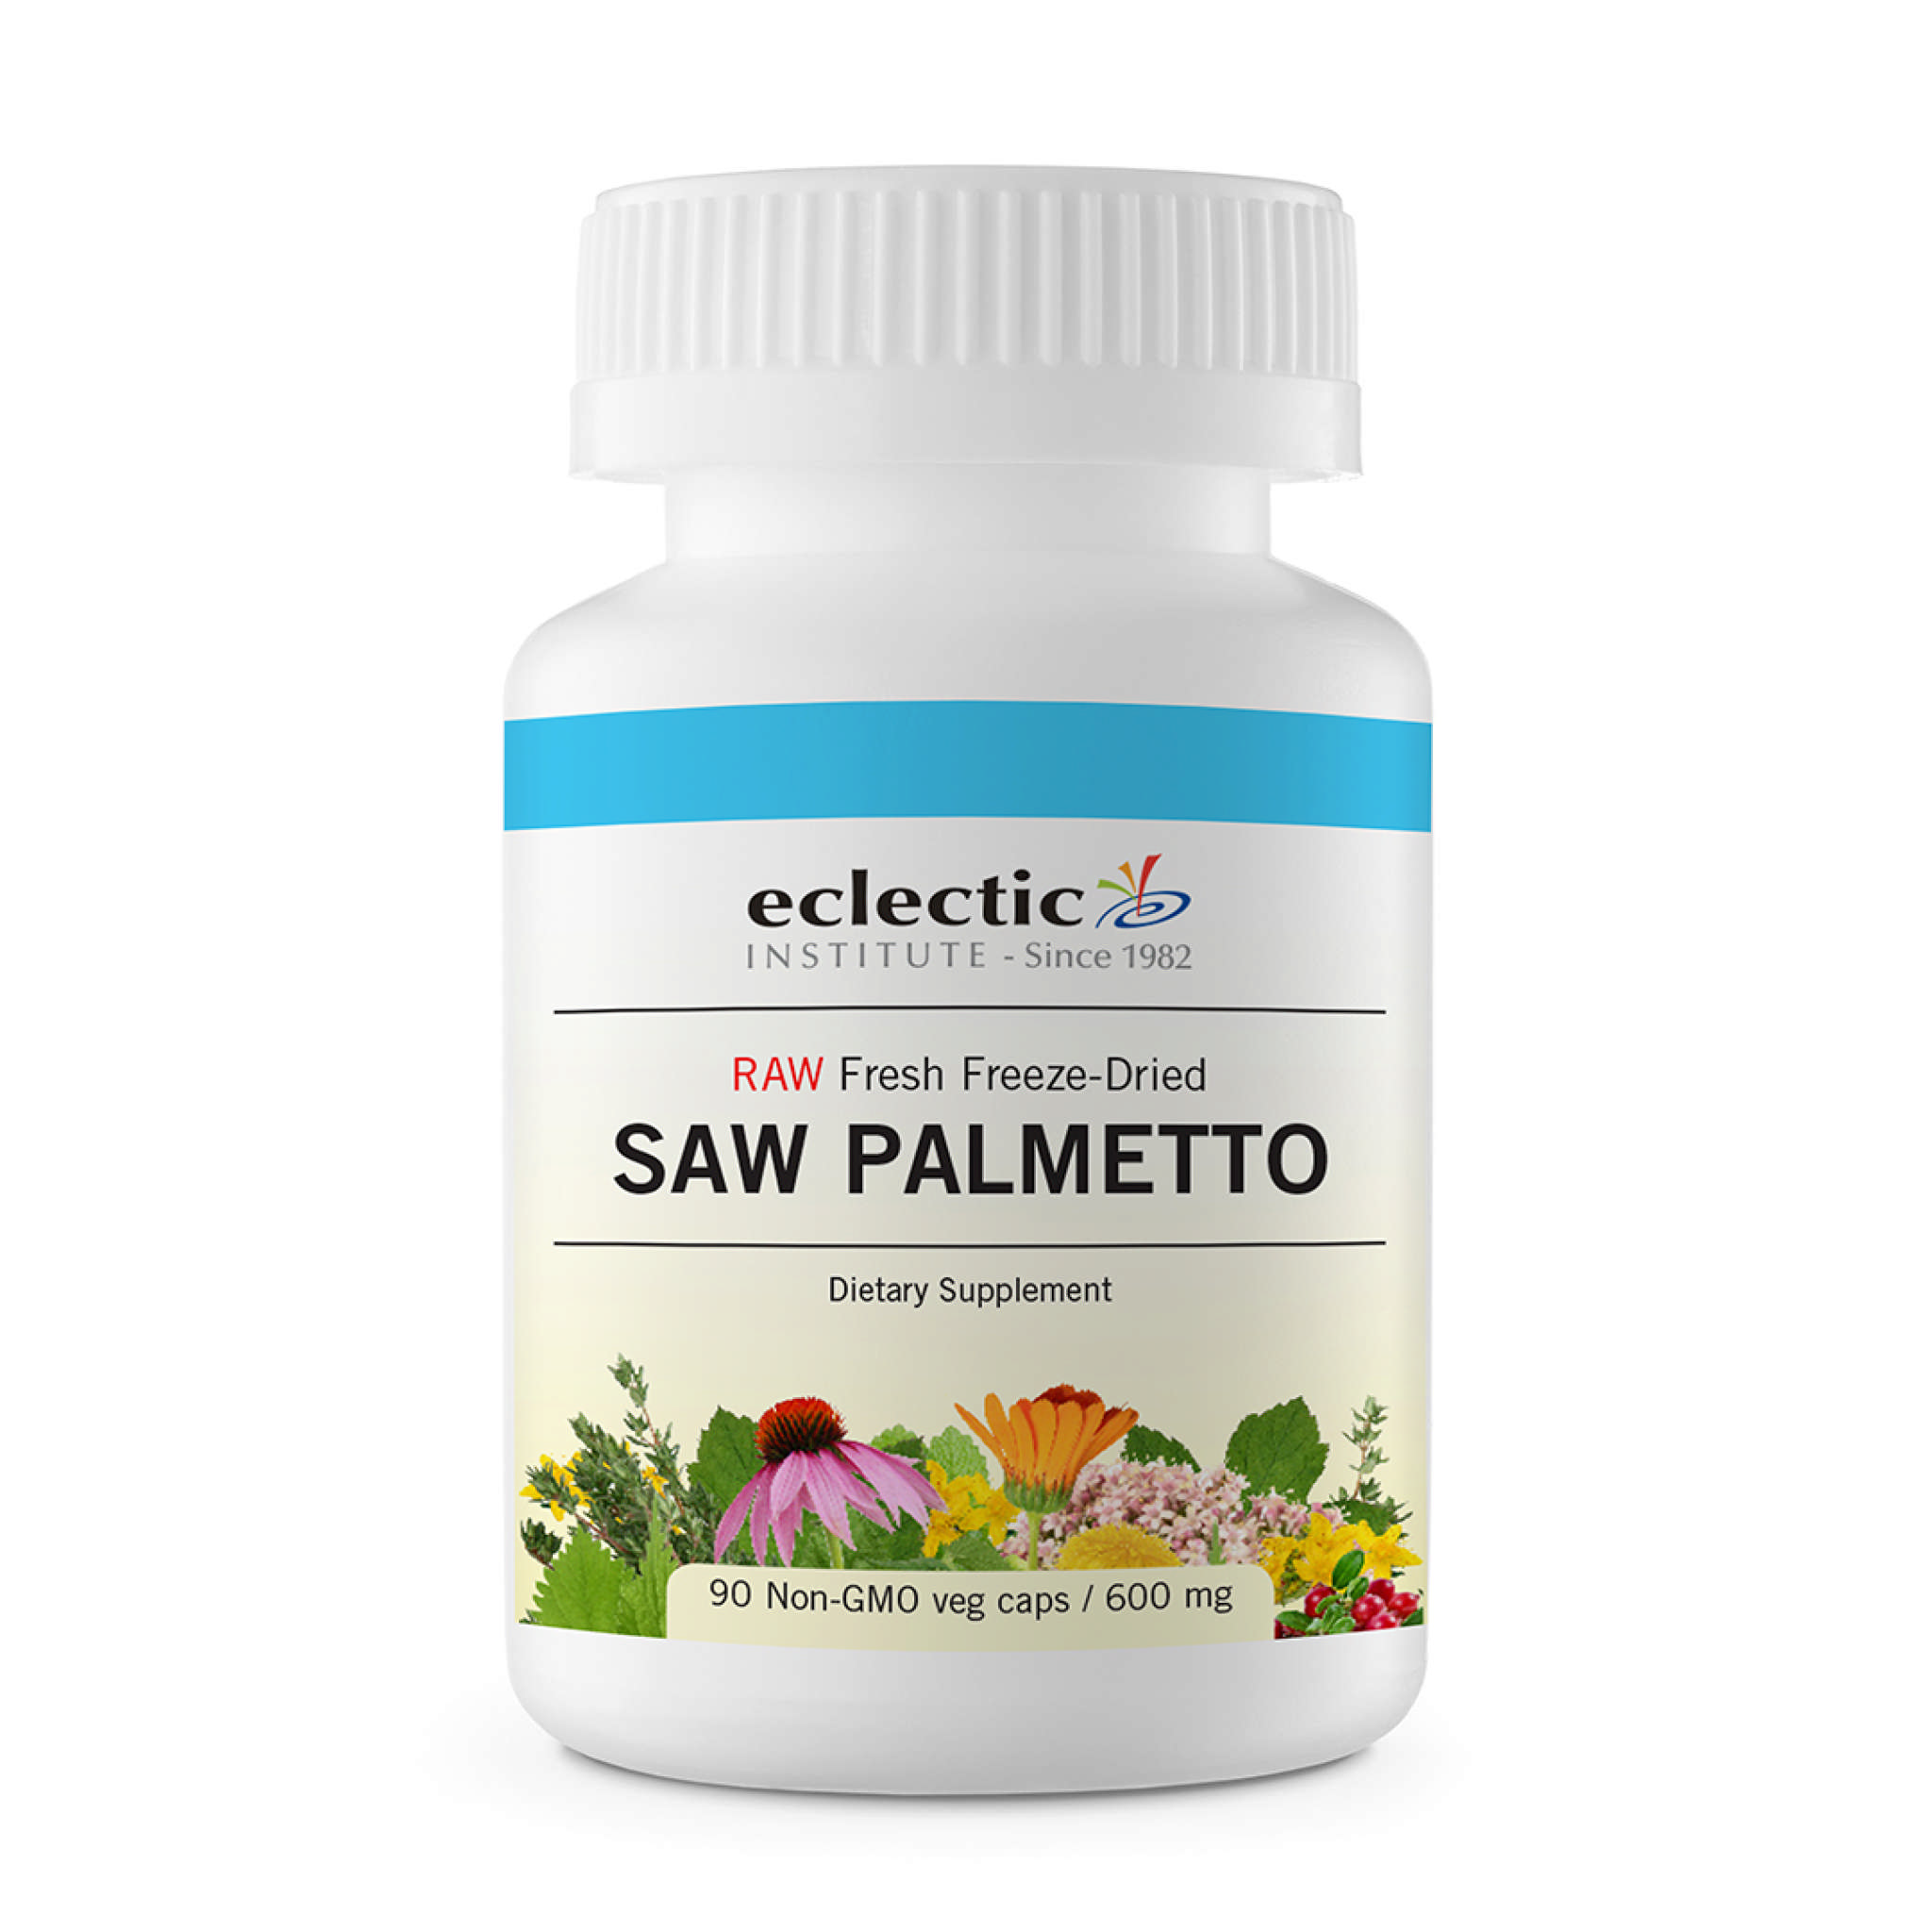 Eclectic Institute - Saw Palmetto 600 mg Fd